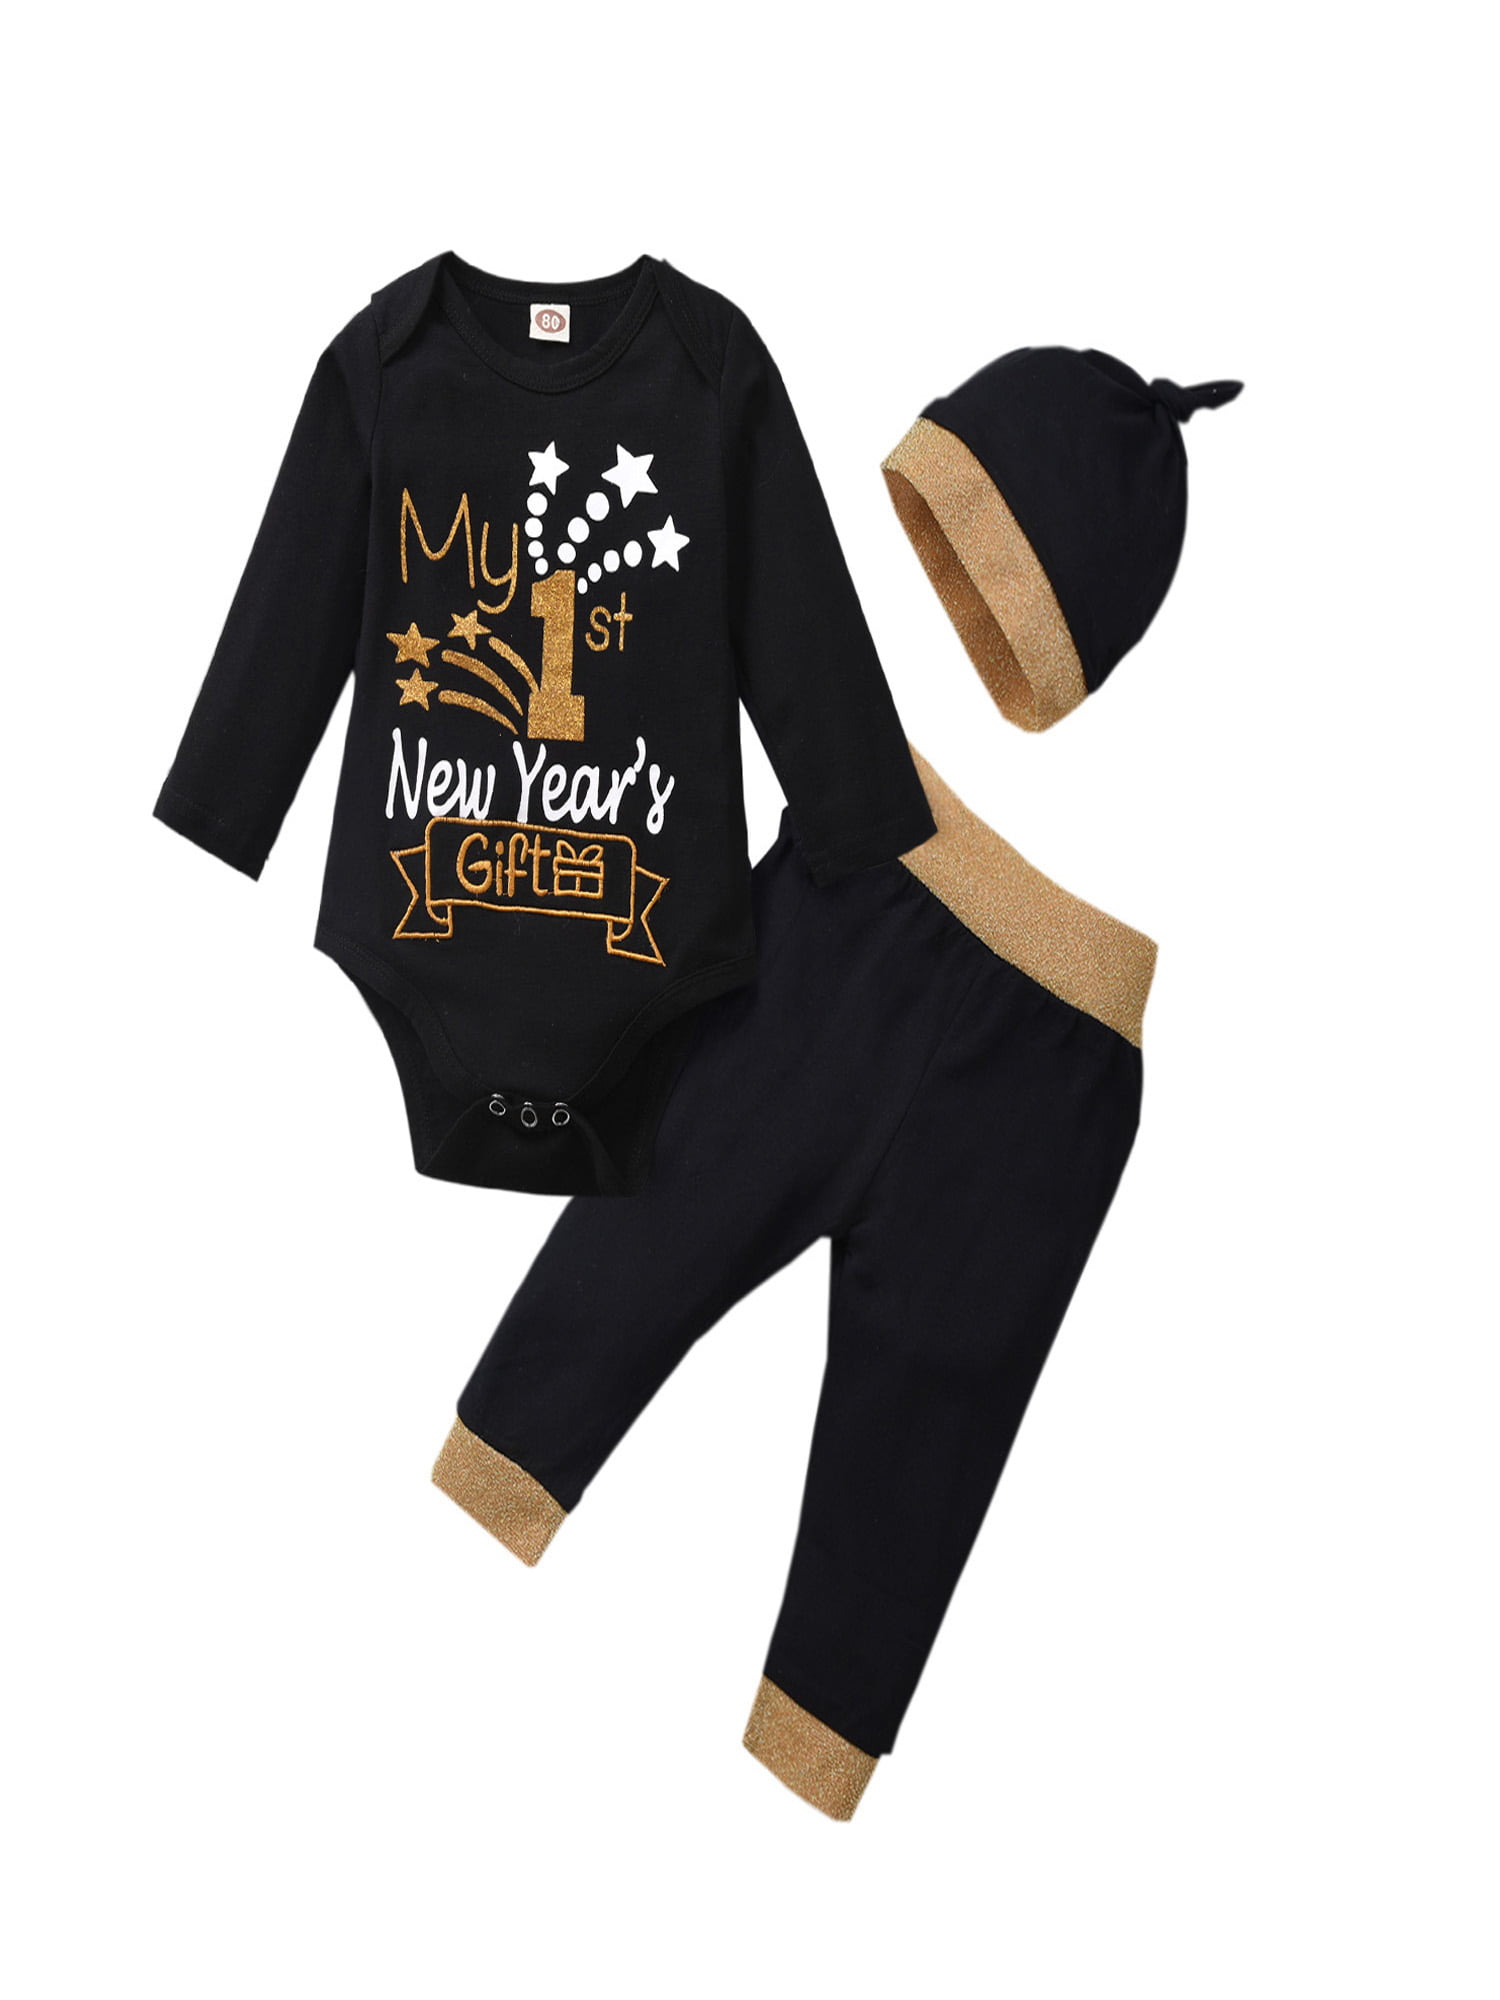 baby first new year outfit